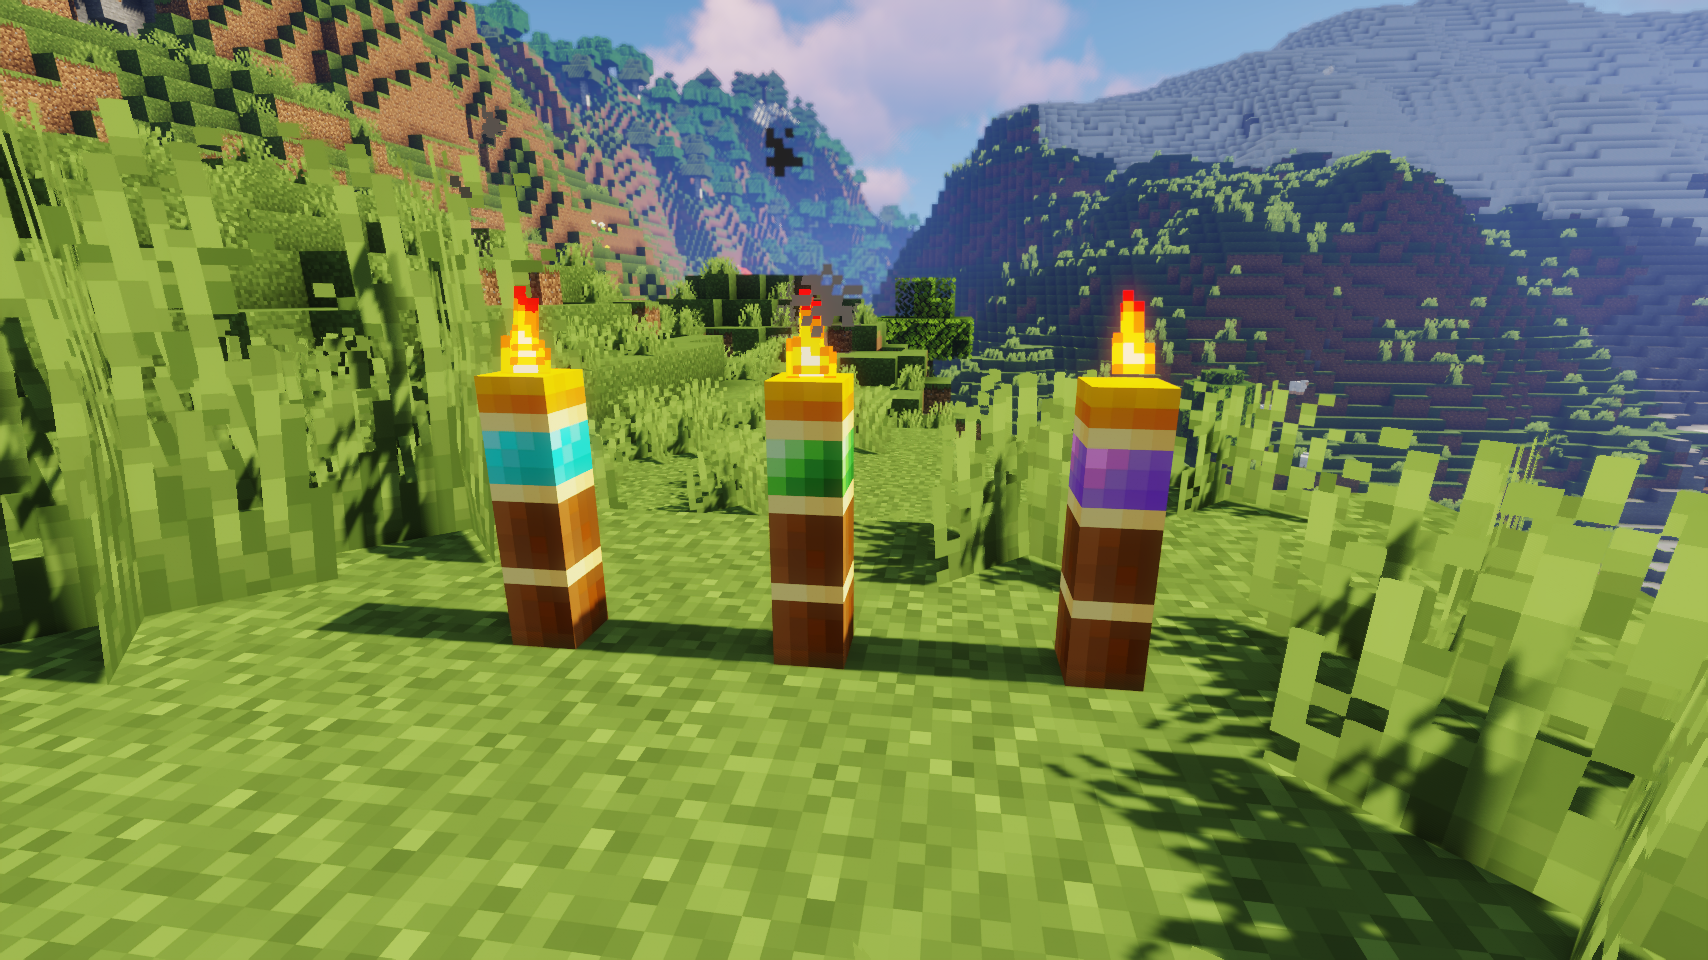 Three kinds of magnum torches, all prevent different mob spawns